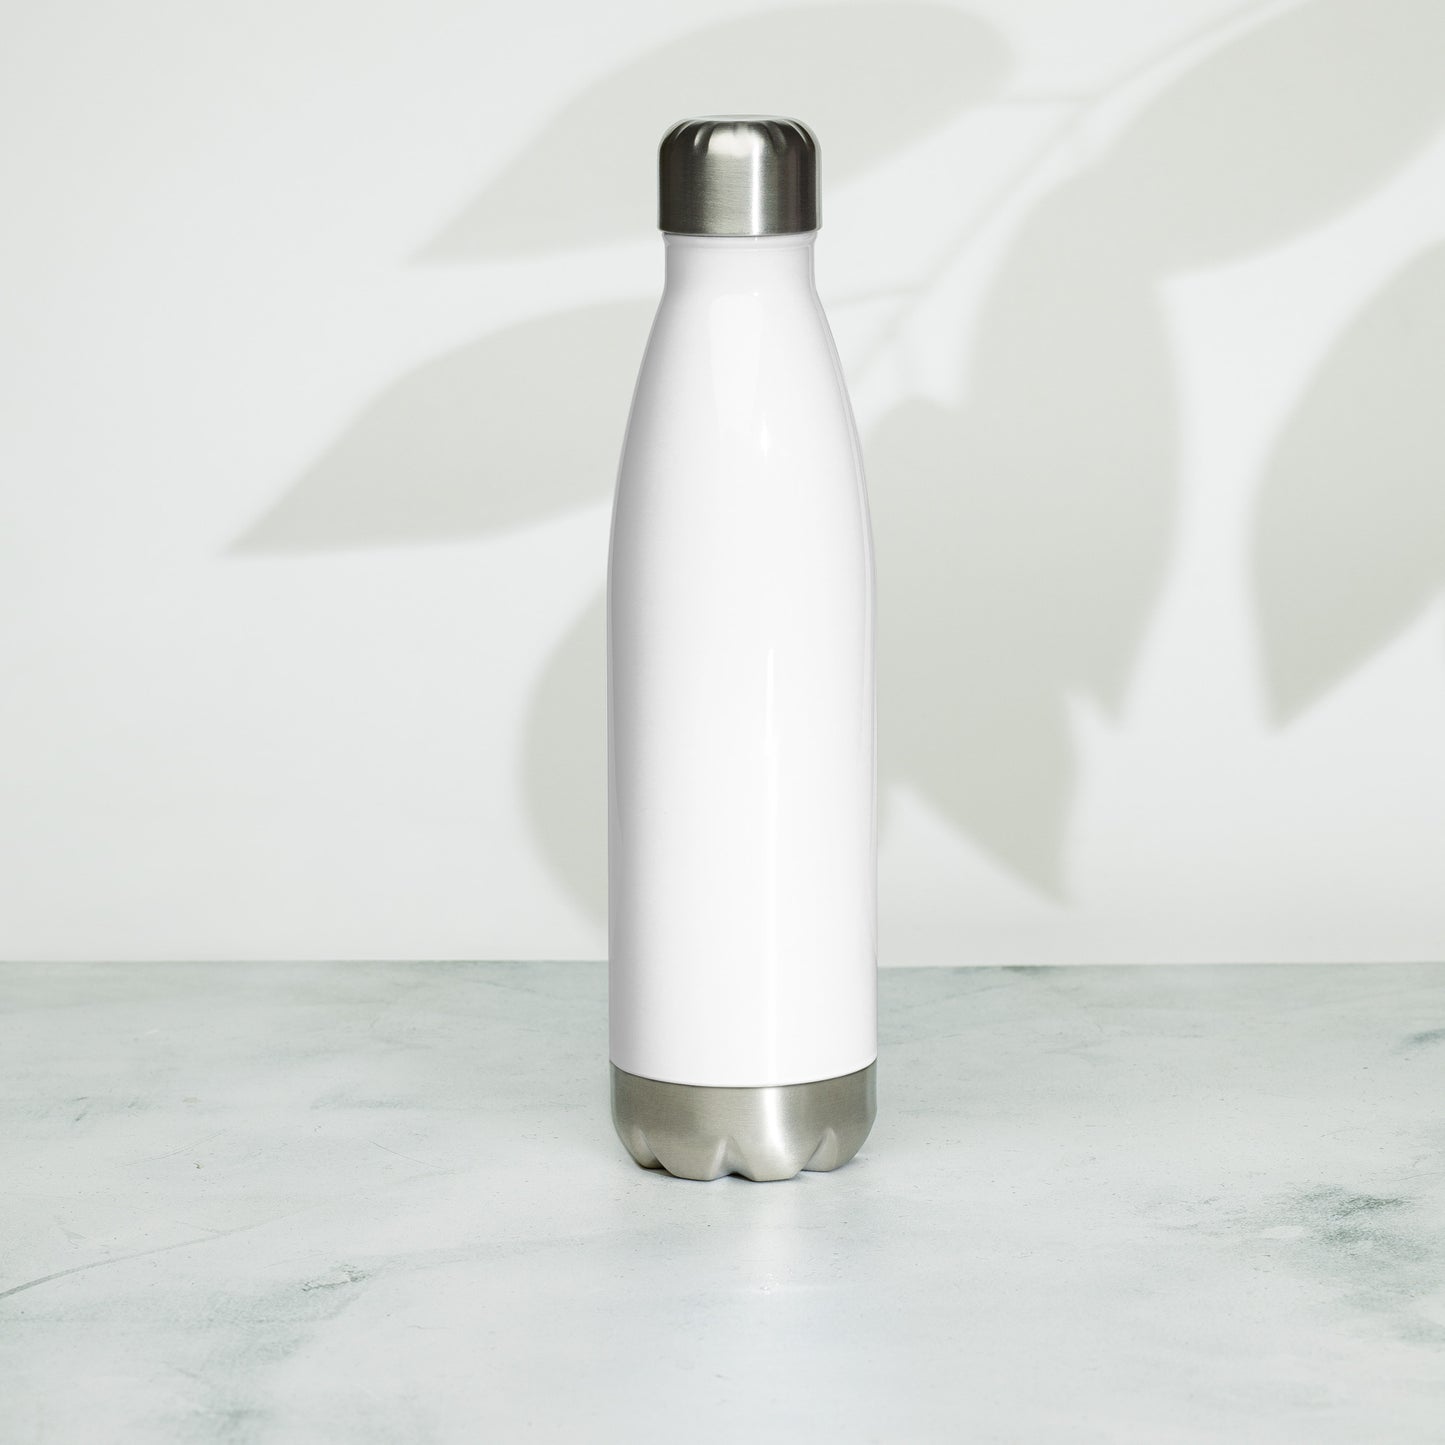 New day stainless steel water bottle